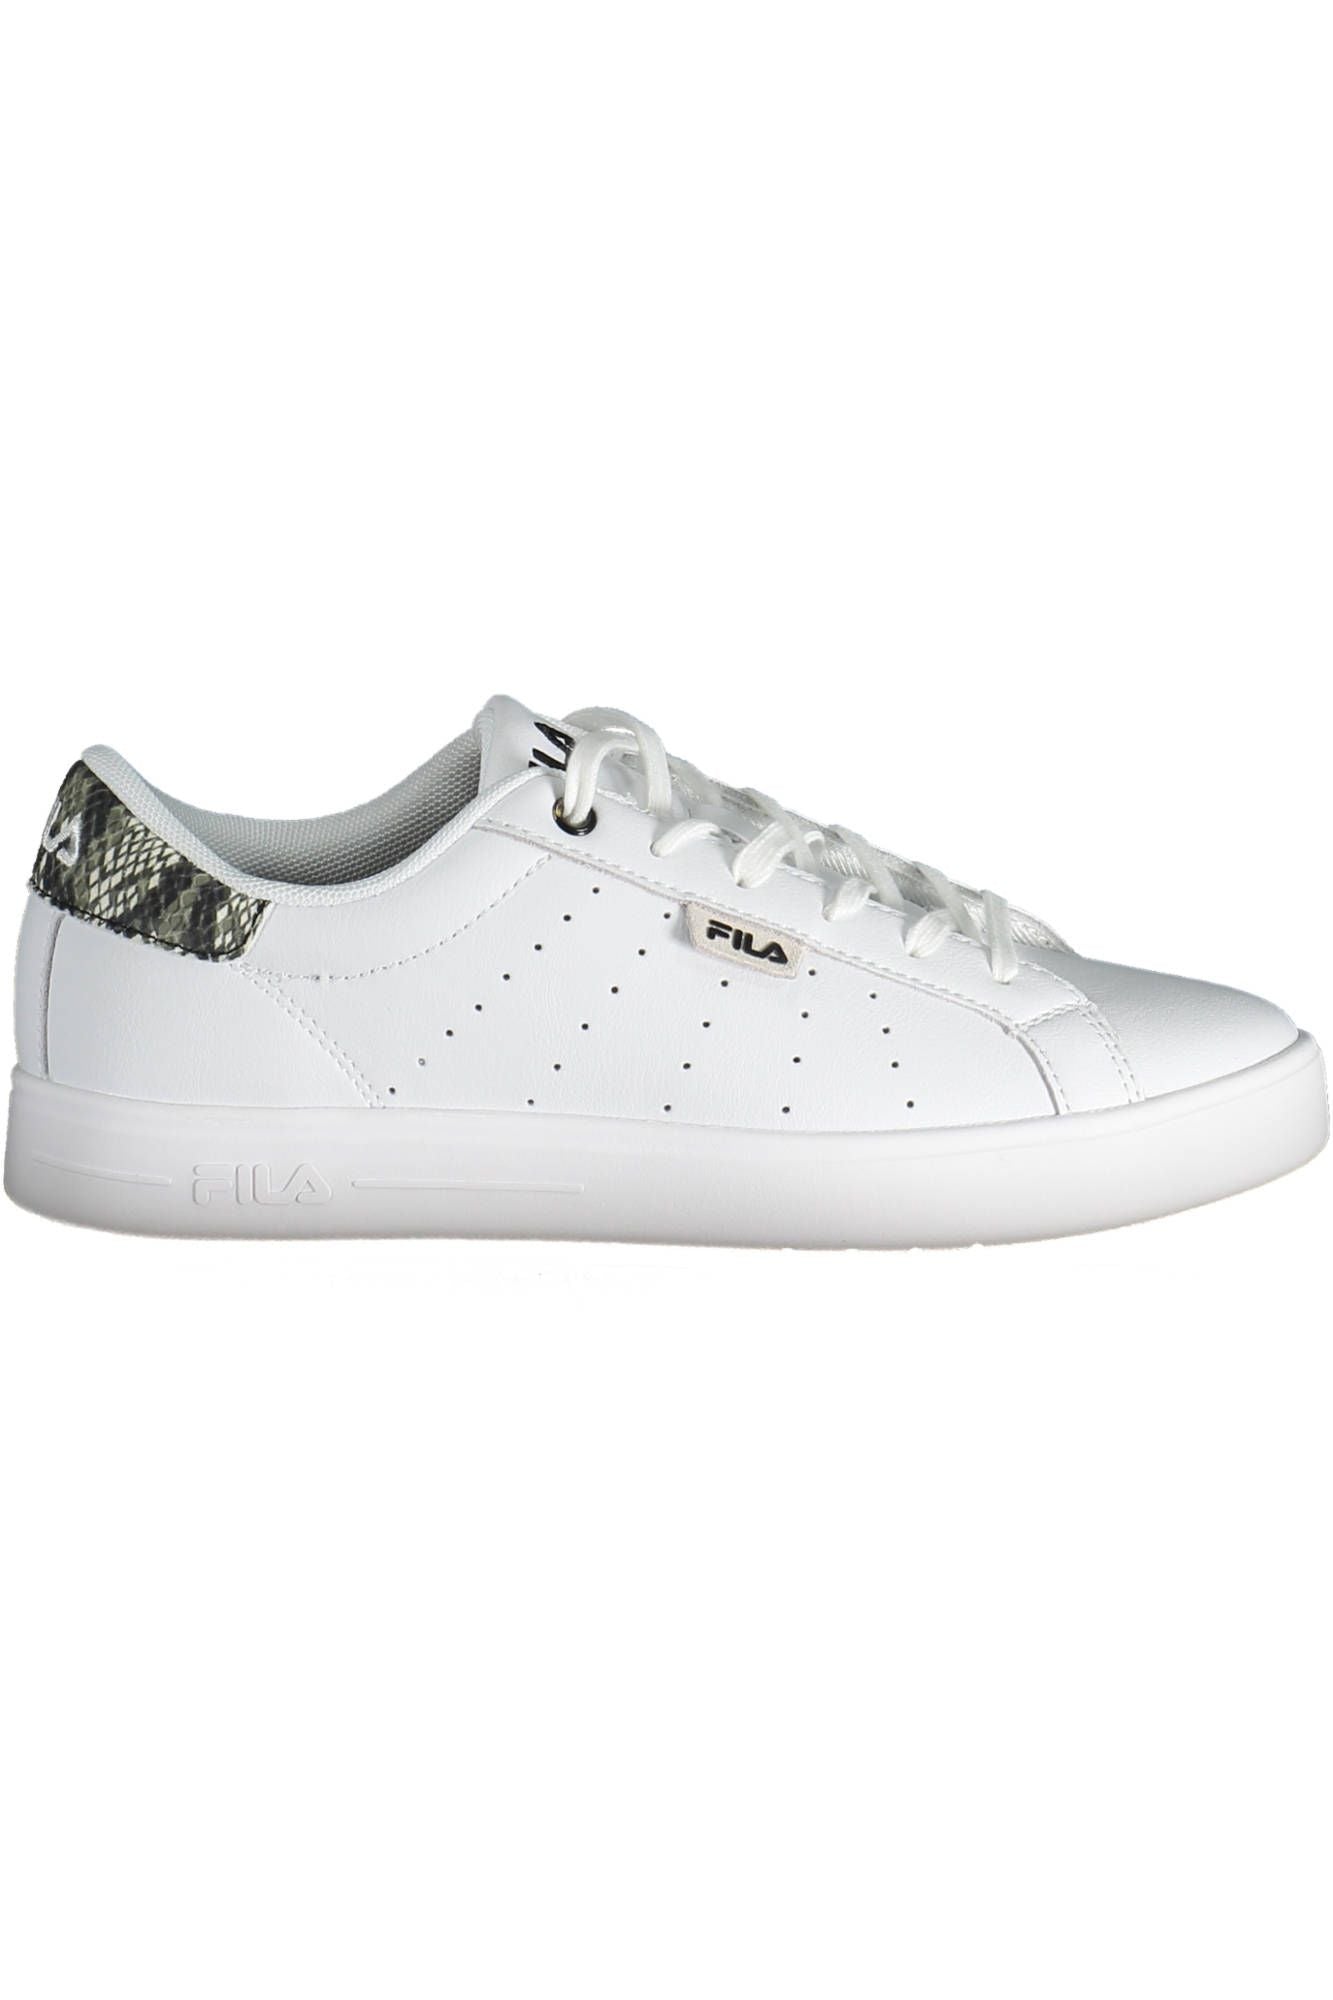 Chic White Sports Sneakers with Contrasting Details